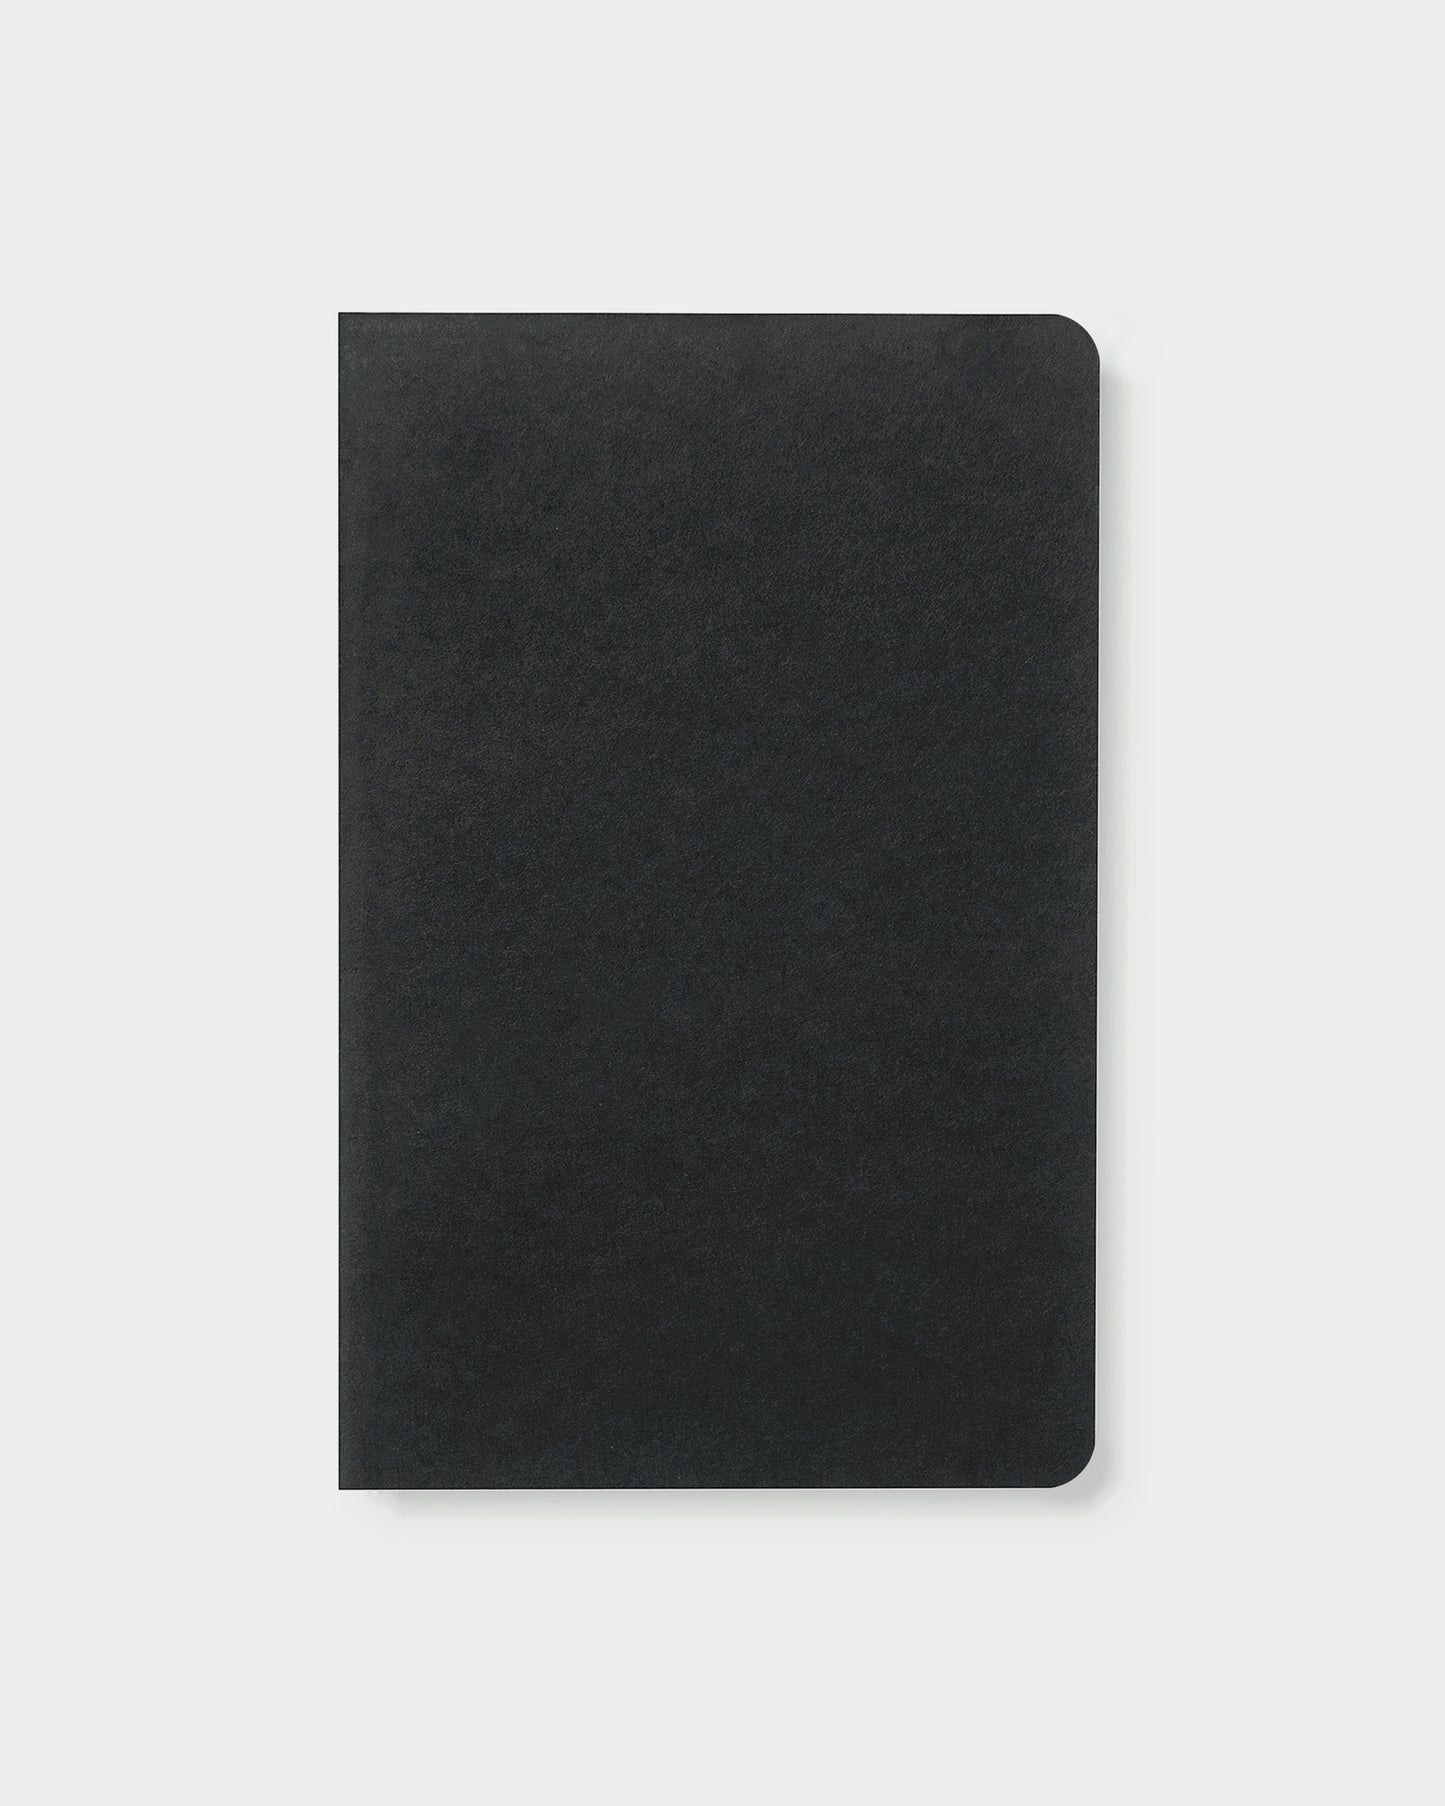 4.25 x 6.5" standard notebook, made with eco-friendly papers. Blank pages, black color way.